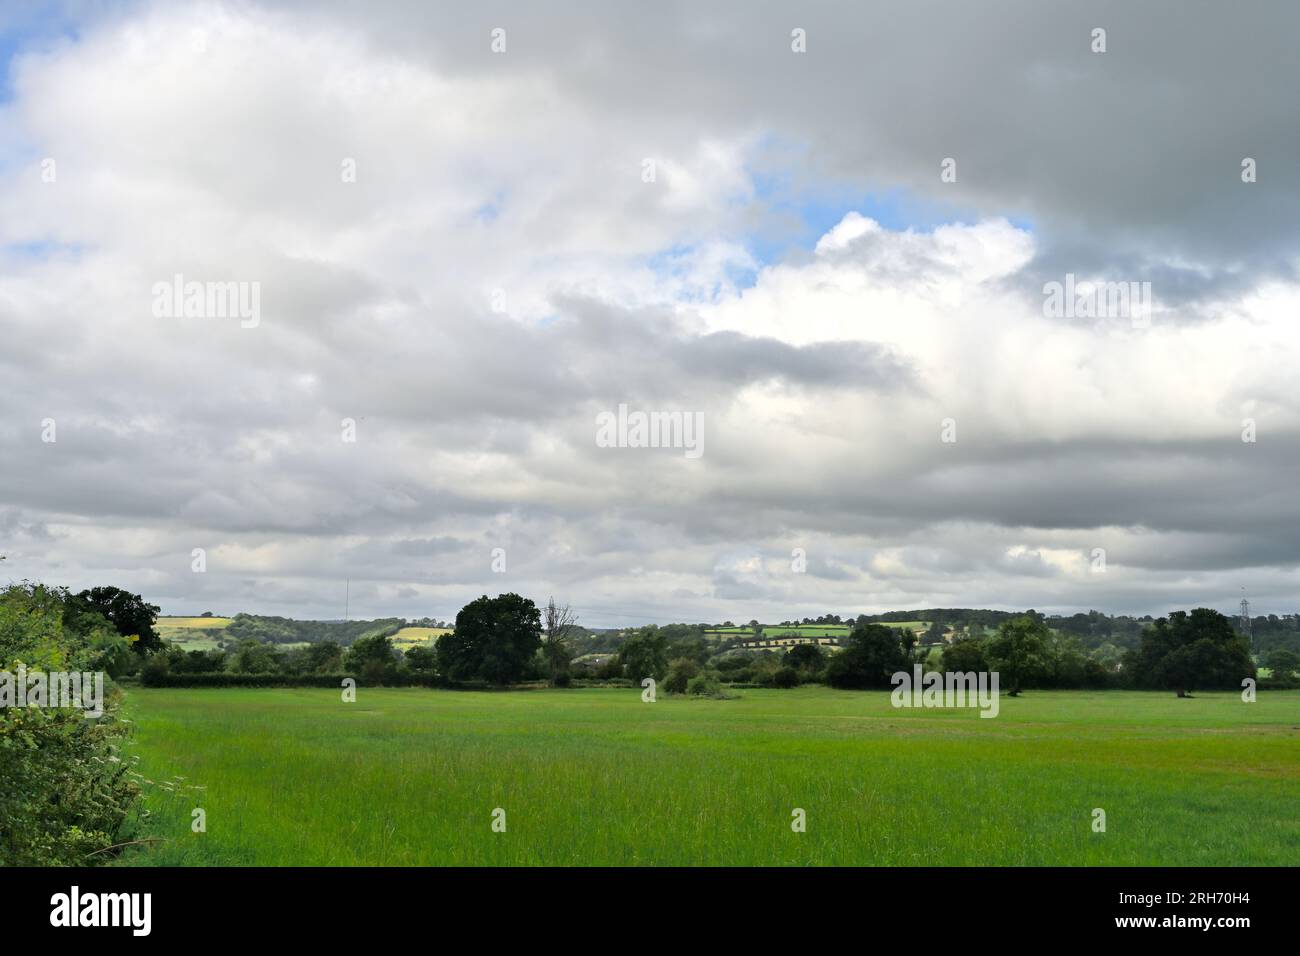 Glastonbury countryside with low hill, trees and fields on cloudy day, UK Stock Photo